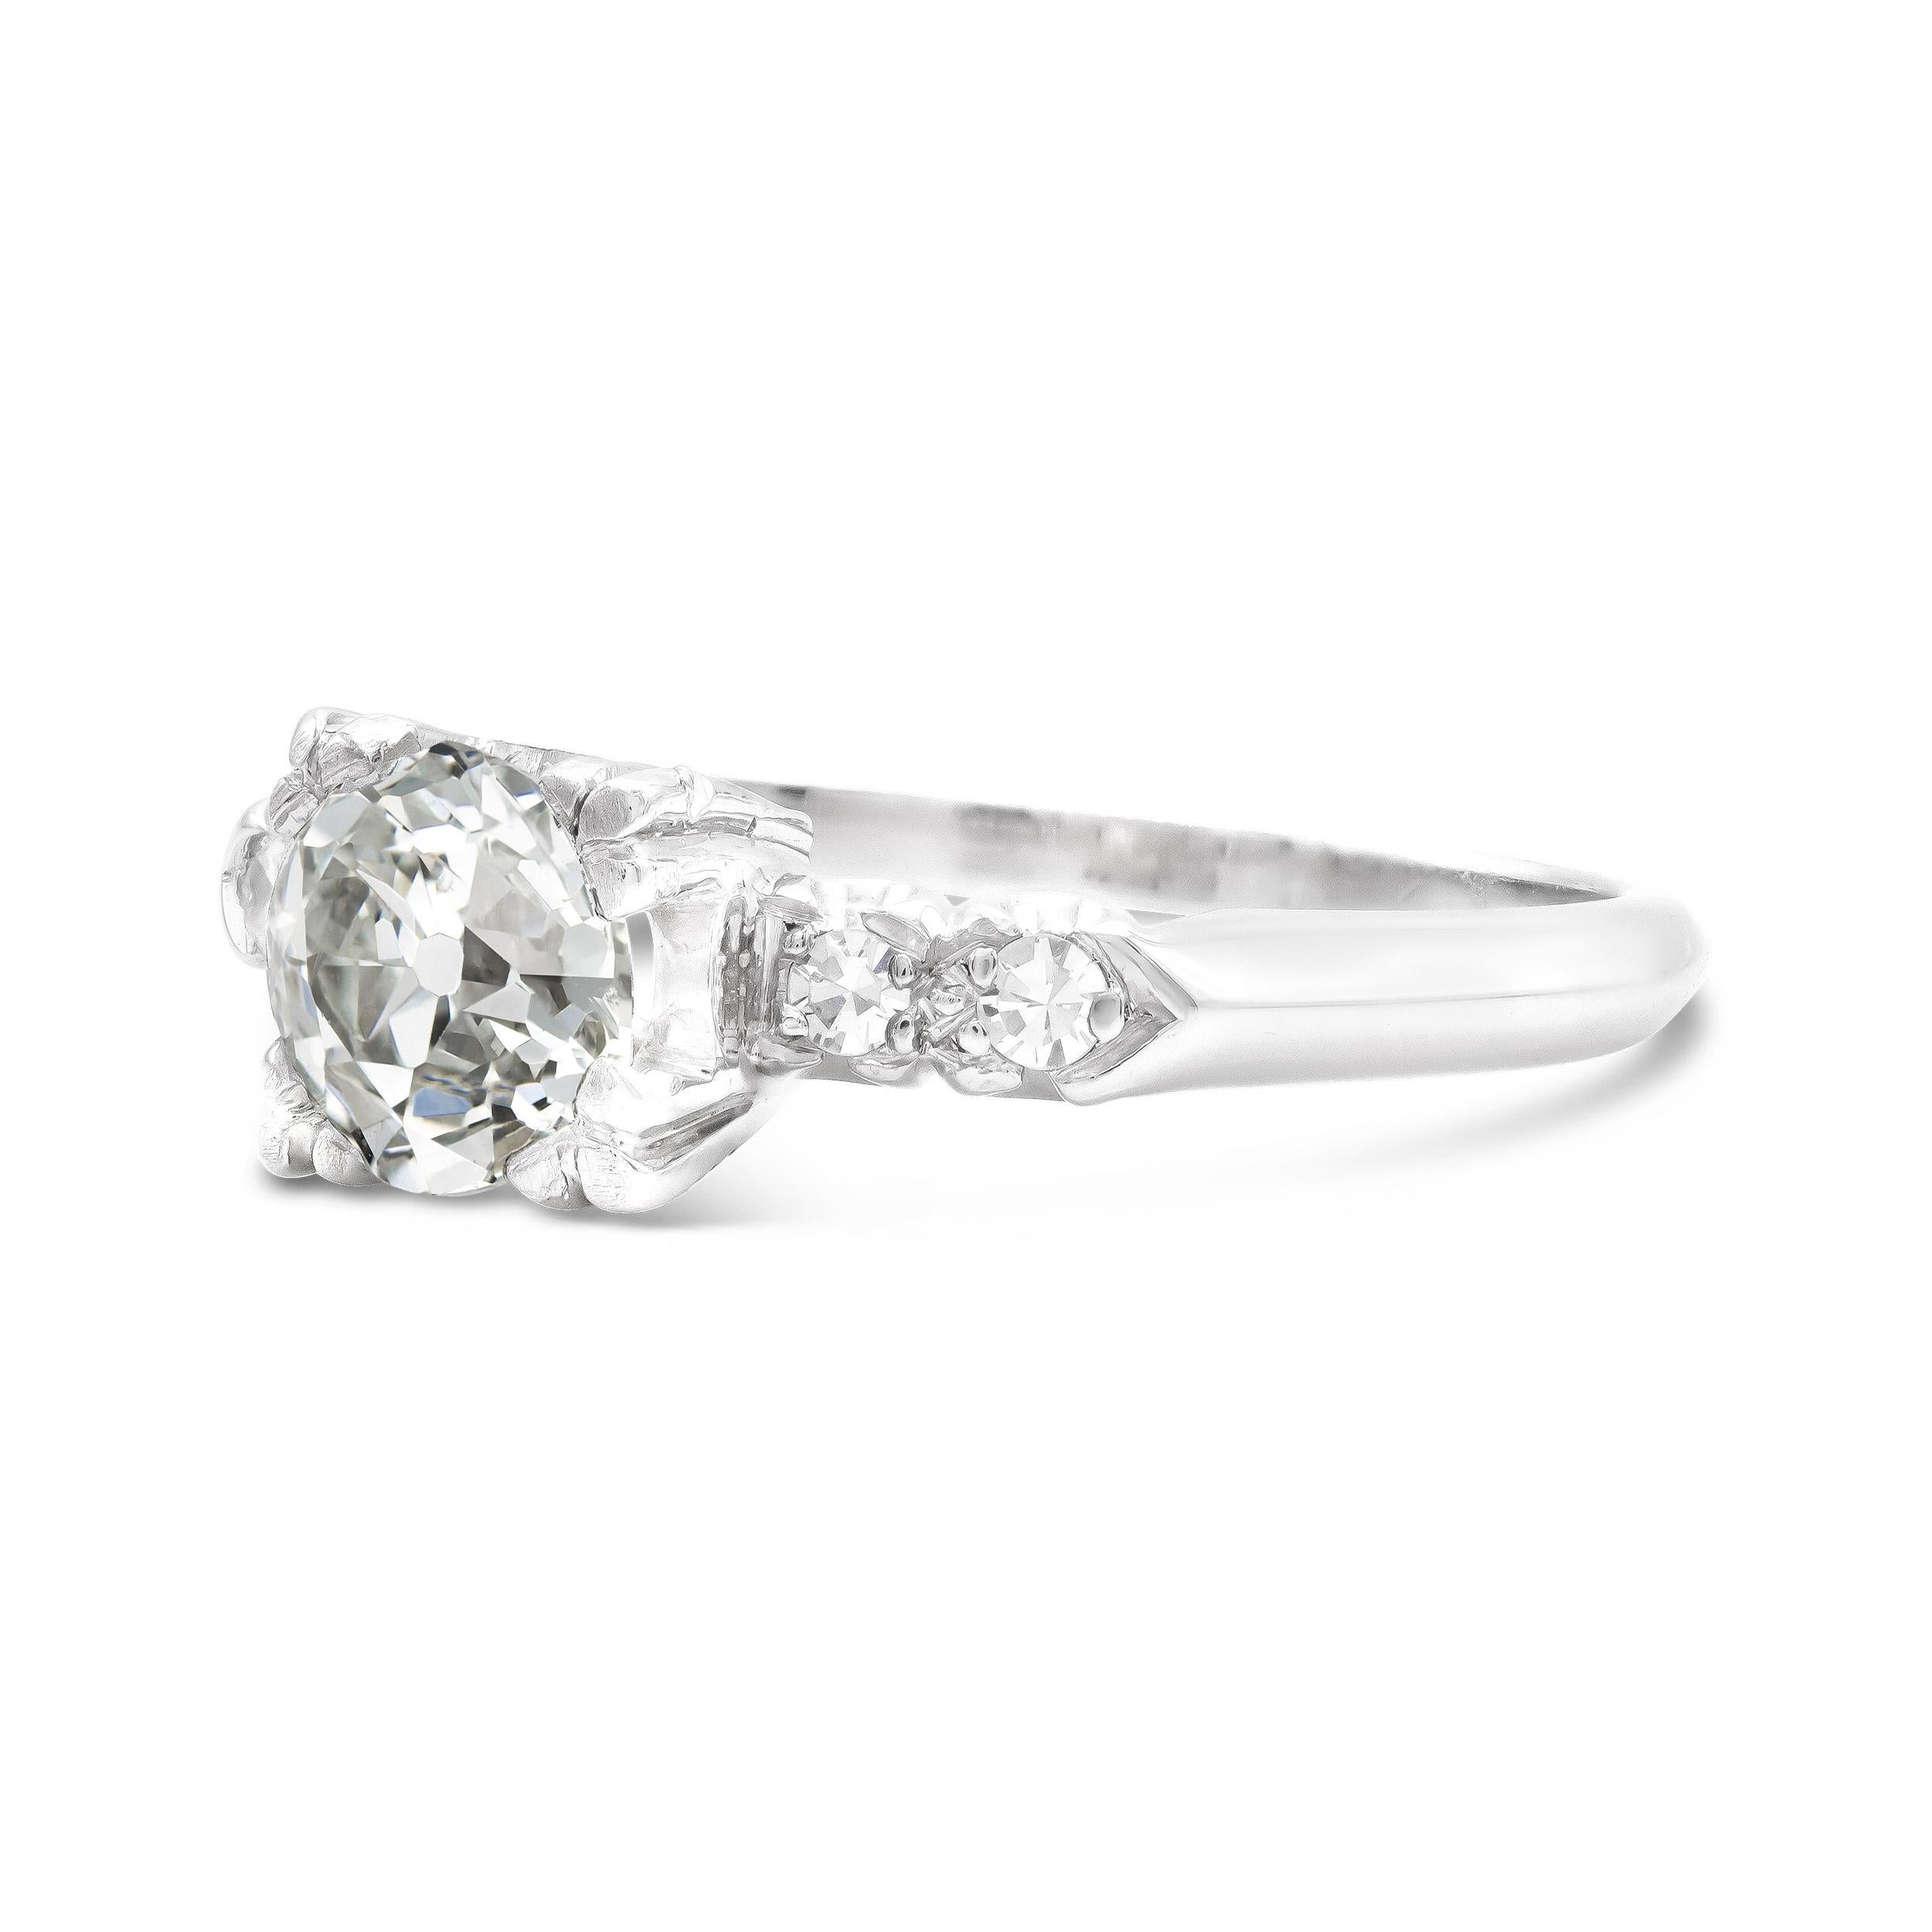 This is as classic as it gets for an Art Deco engagement ring design. We have a GIA graded old European cut diamond weighing nearly a full carat and captivating us with its mesmerizing sparkle. Complete by shouldering single cuts and a knifes-edge